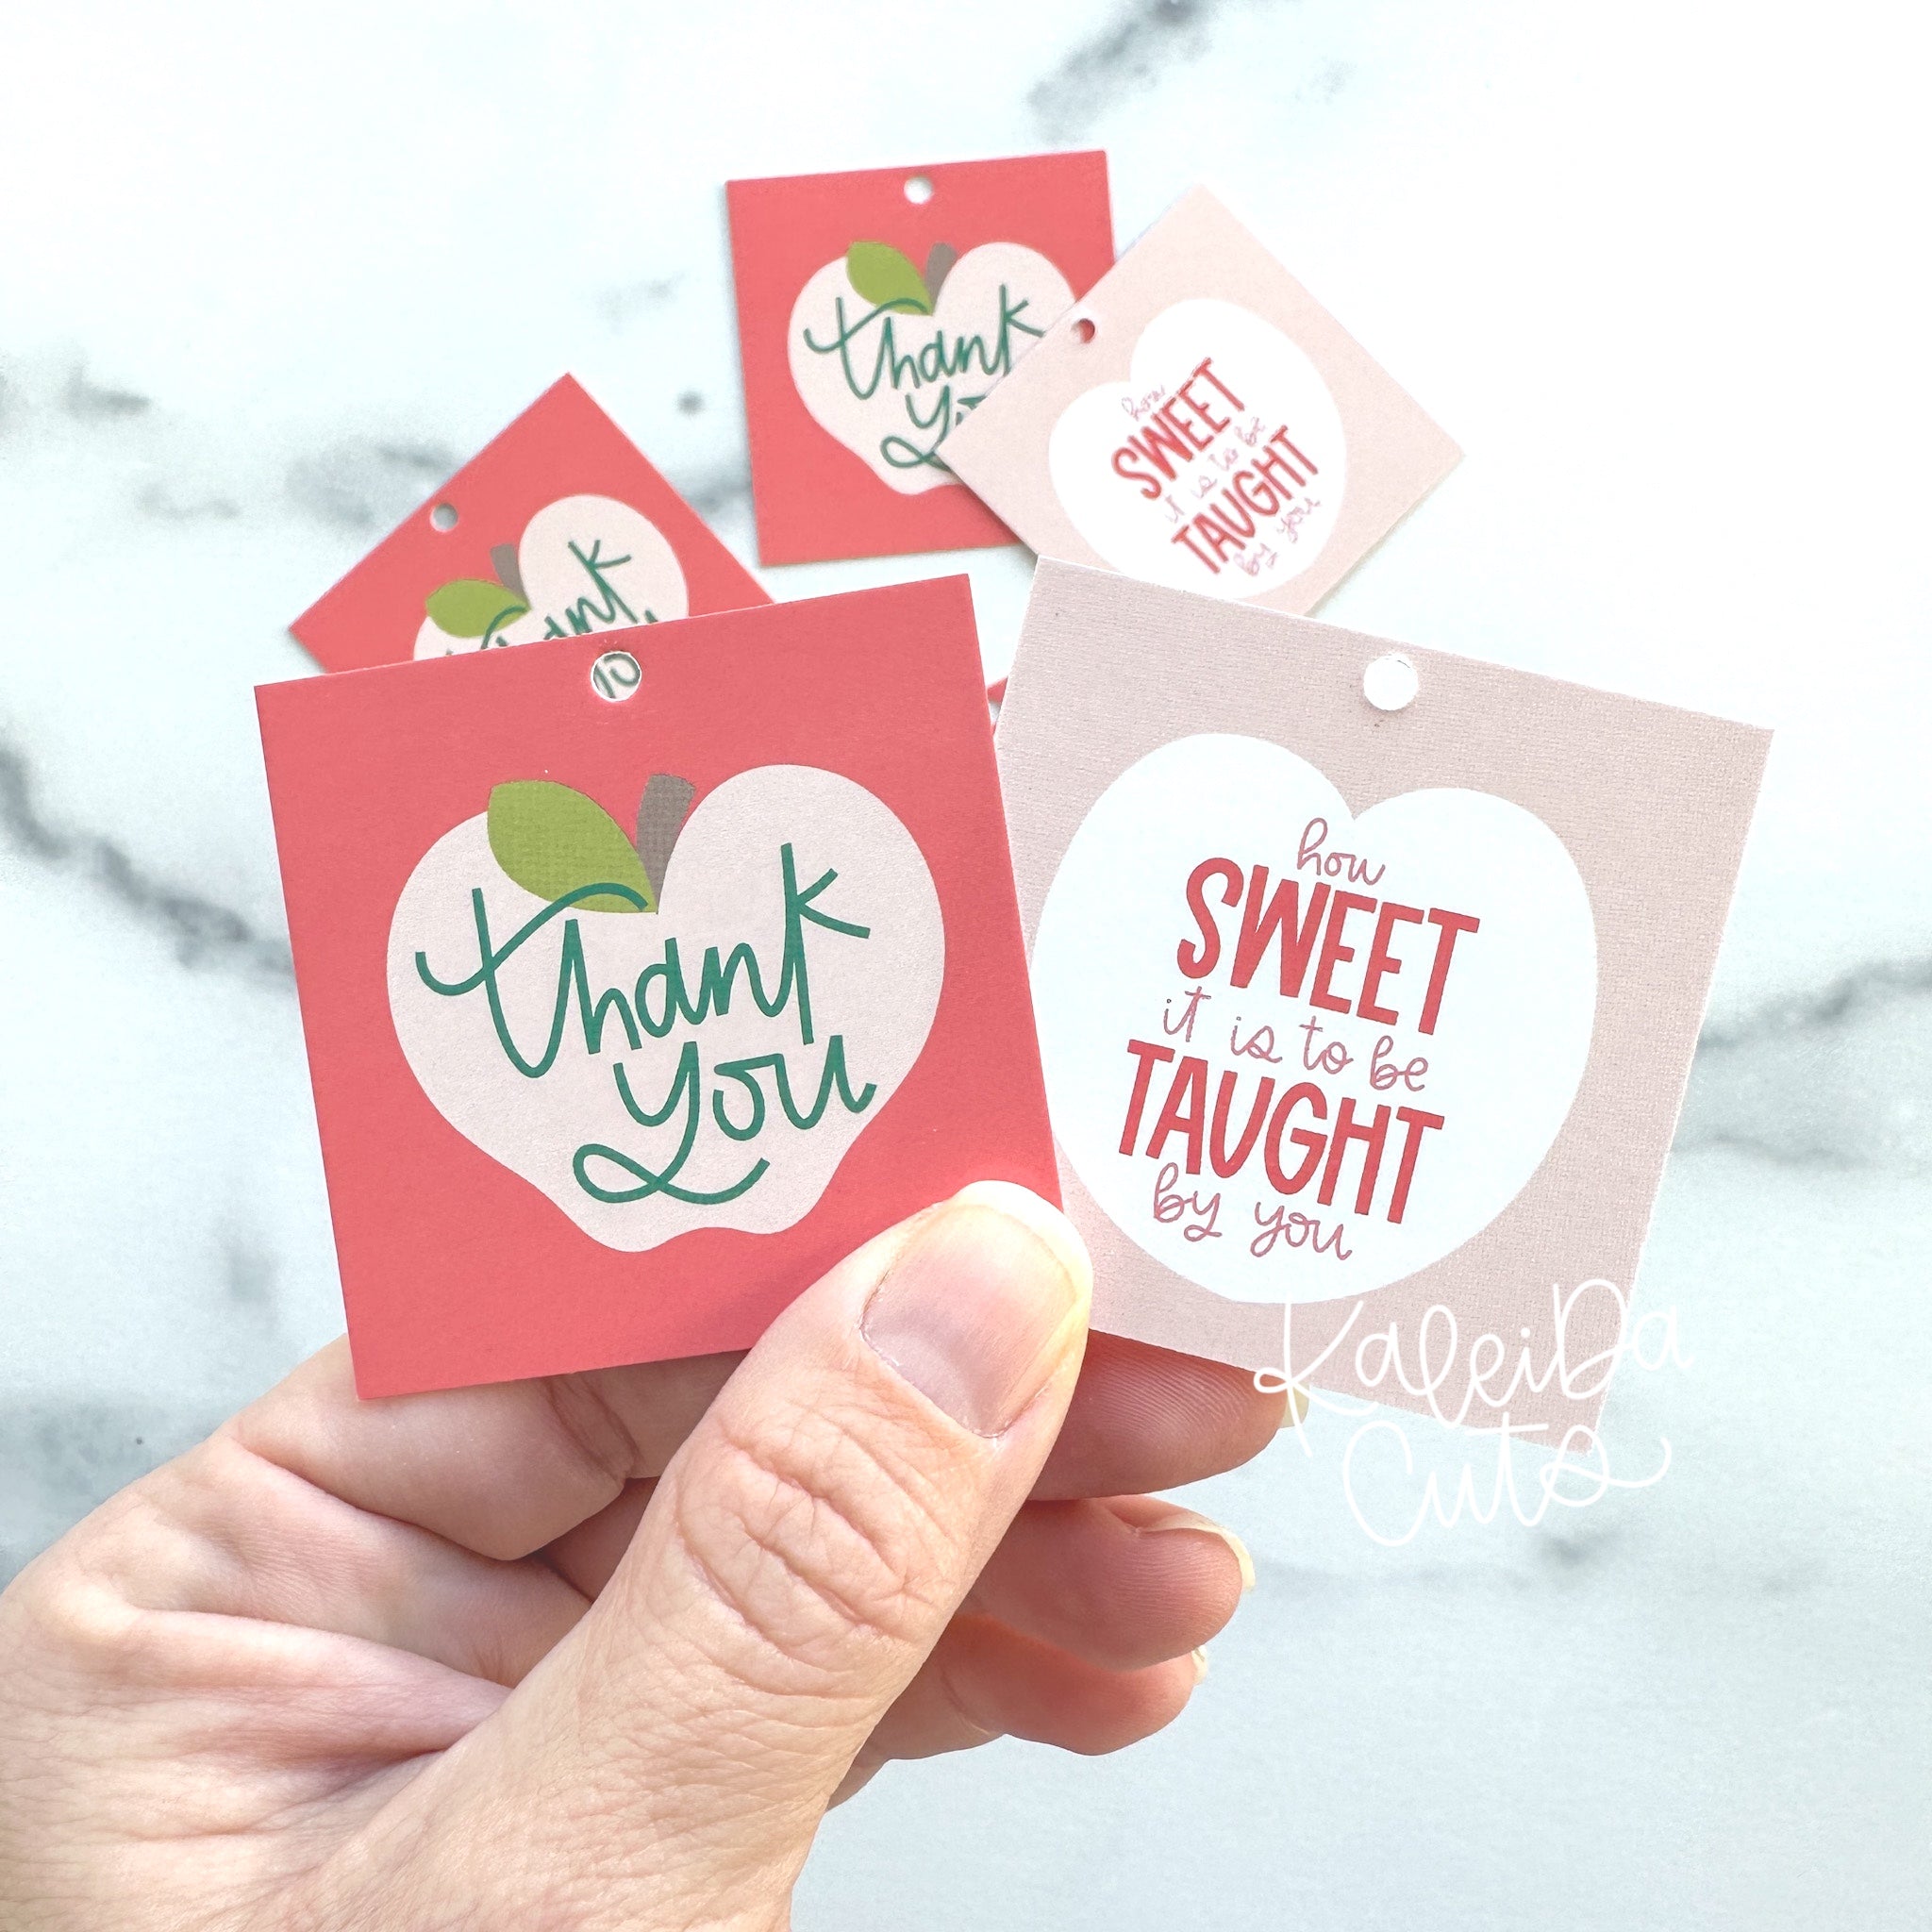 25 Valentine's Day Gifts for Teachers That Show How Much You Appreciate Them